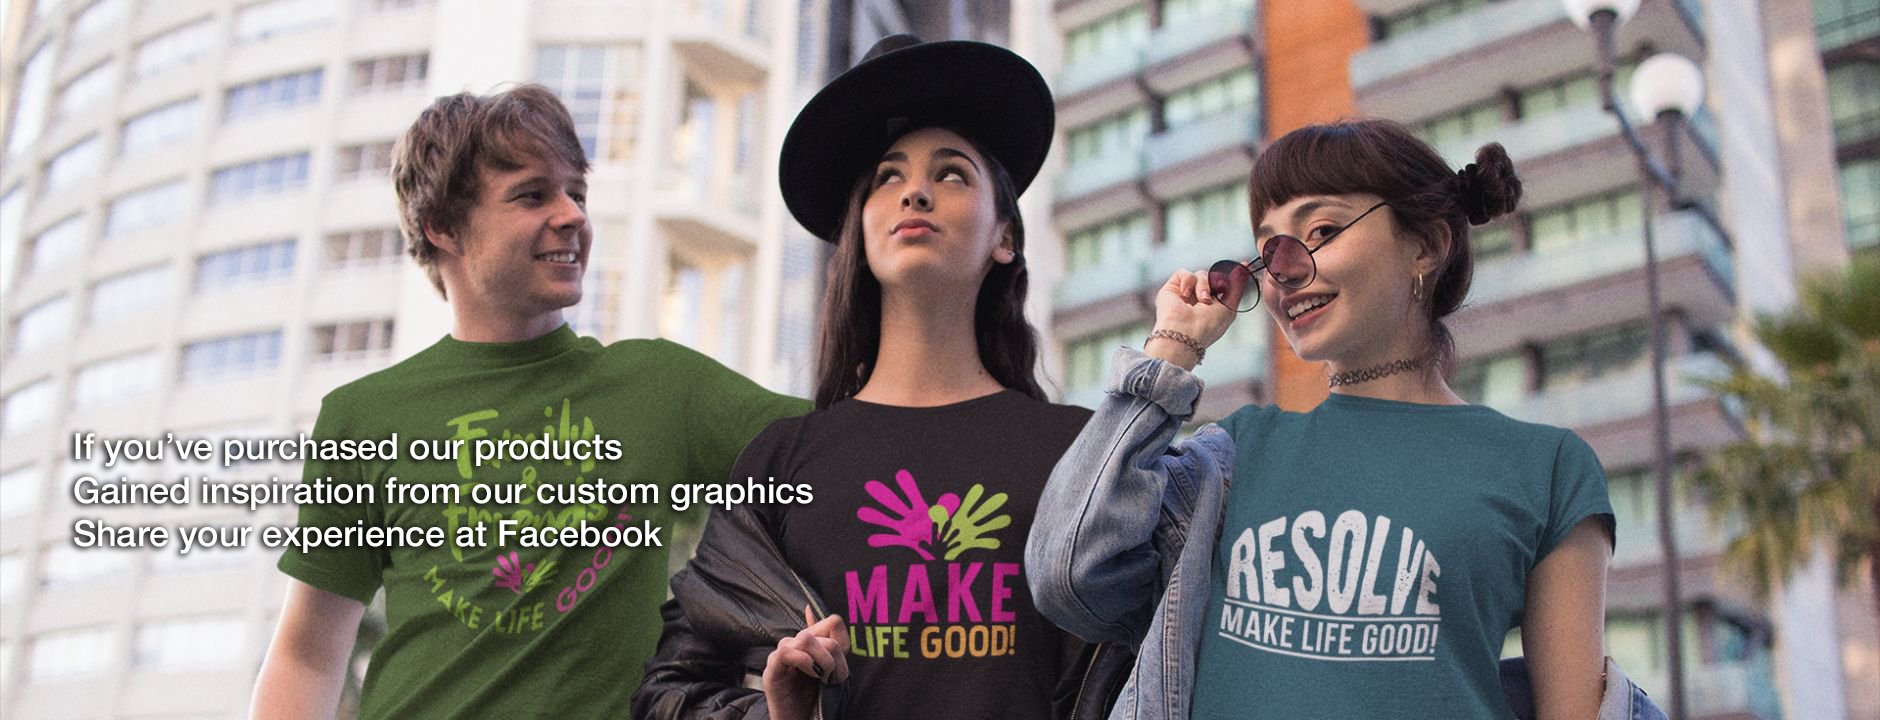 Review Make Life Good on Facebook